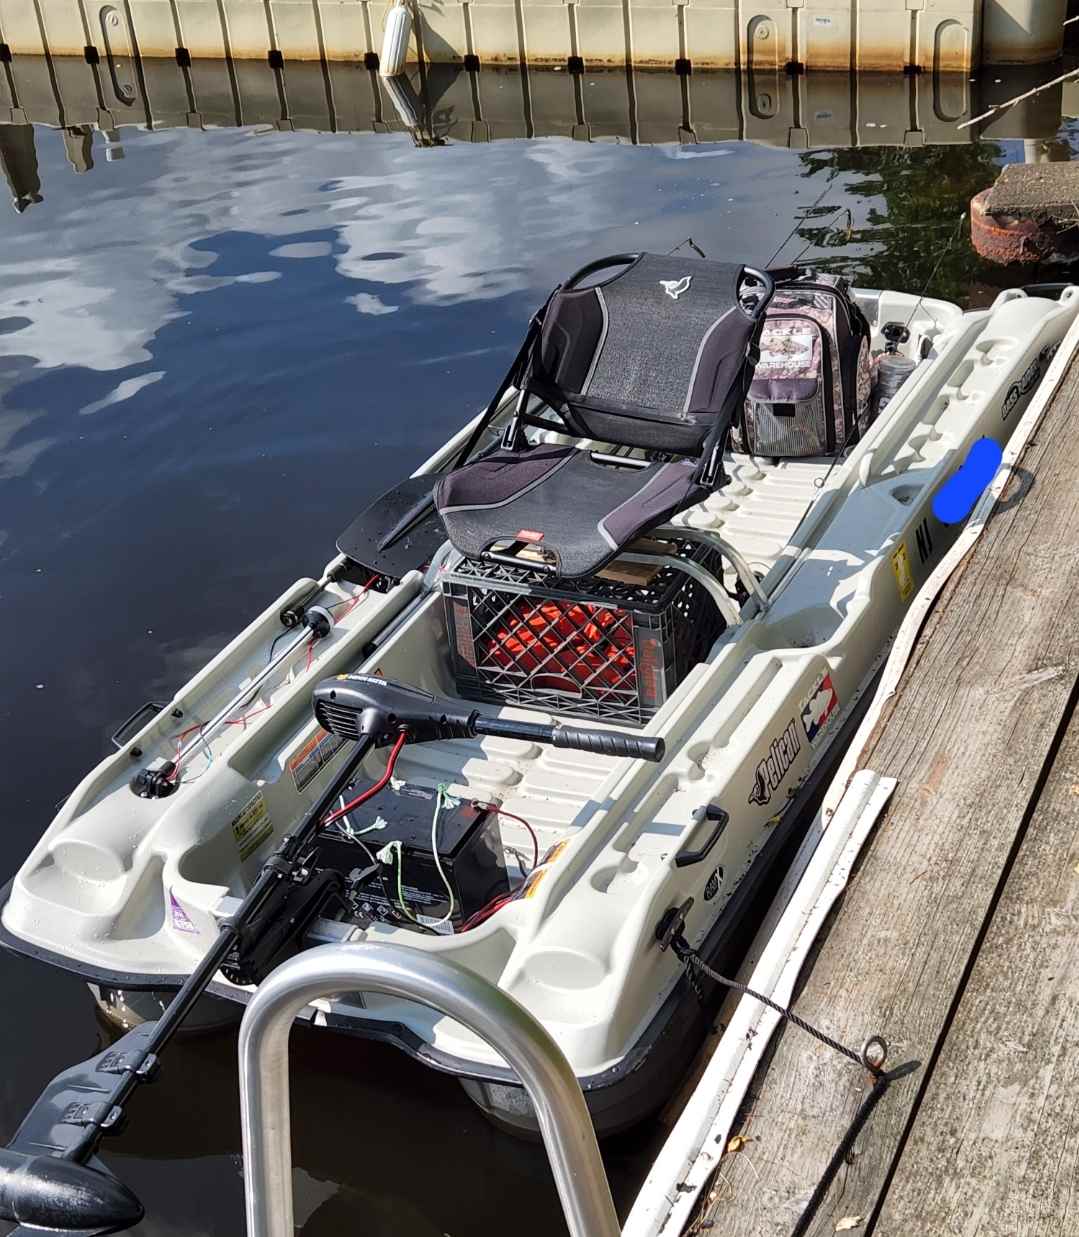 Any Pelican Bass Raider Owners Out There? - Page 135 - Bass Boats, Canoes,  Kayaks and more - Bass Fishing Forums